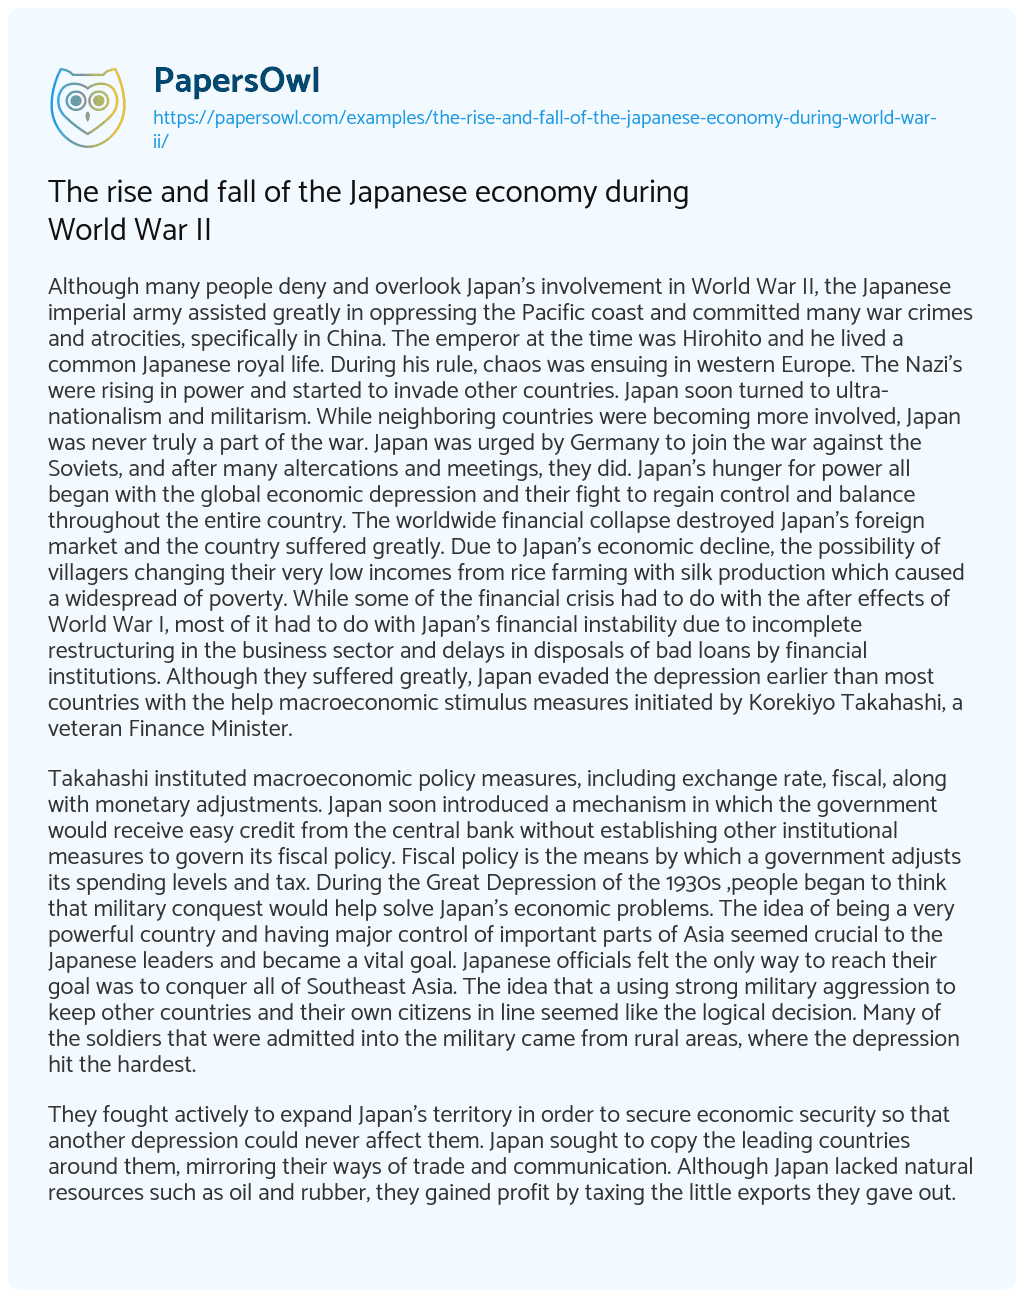 Essay on The Rise and Fall of the Japanese Economy during World War II